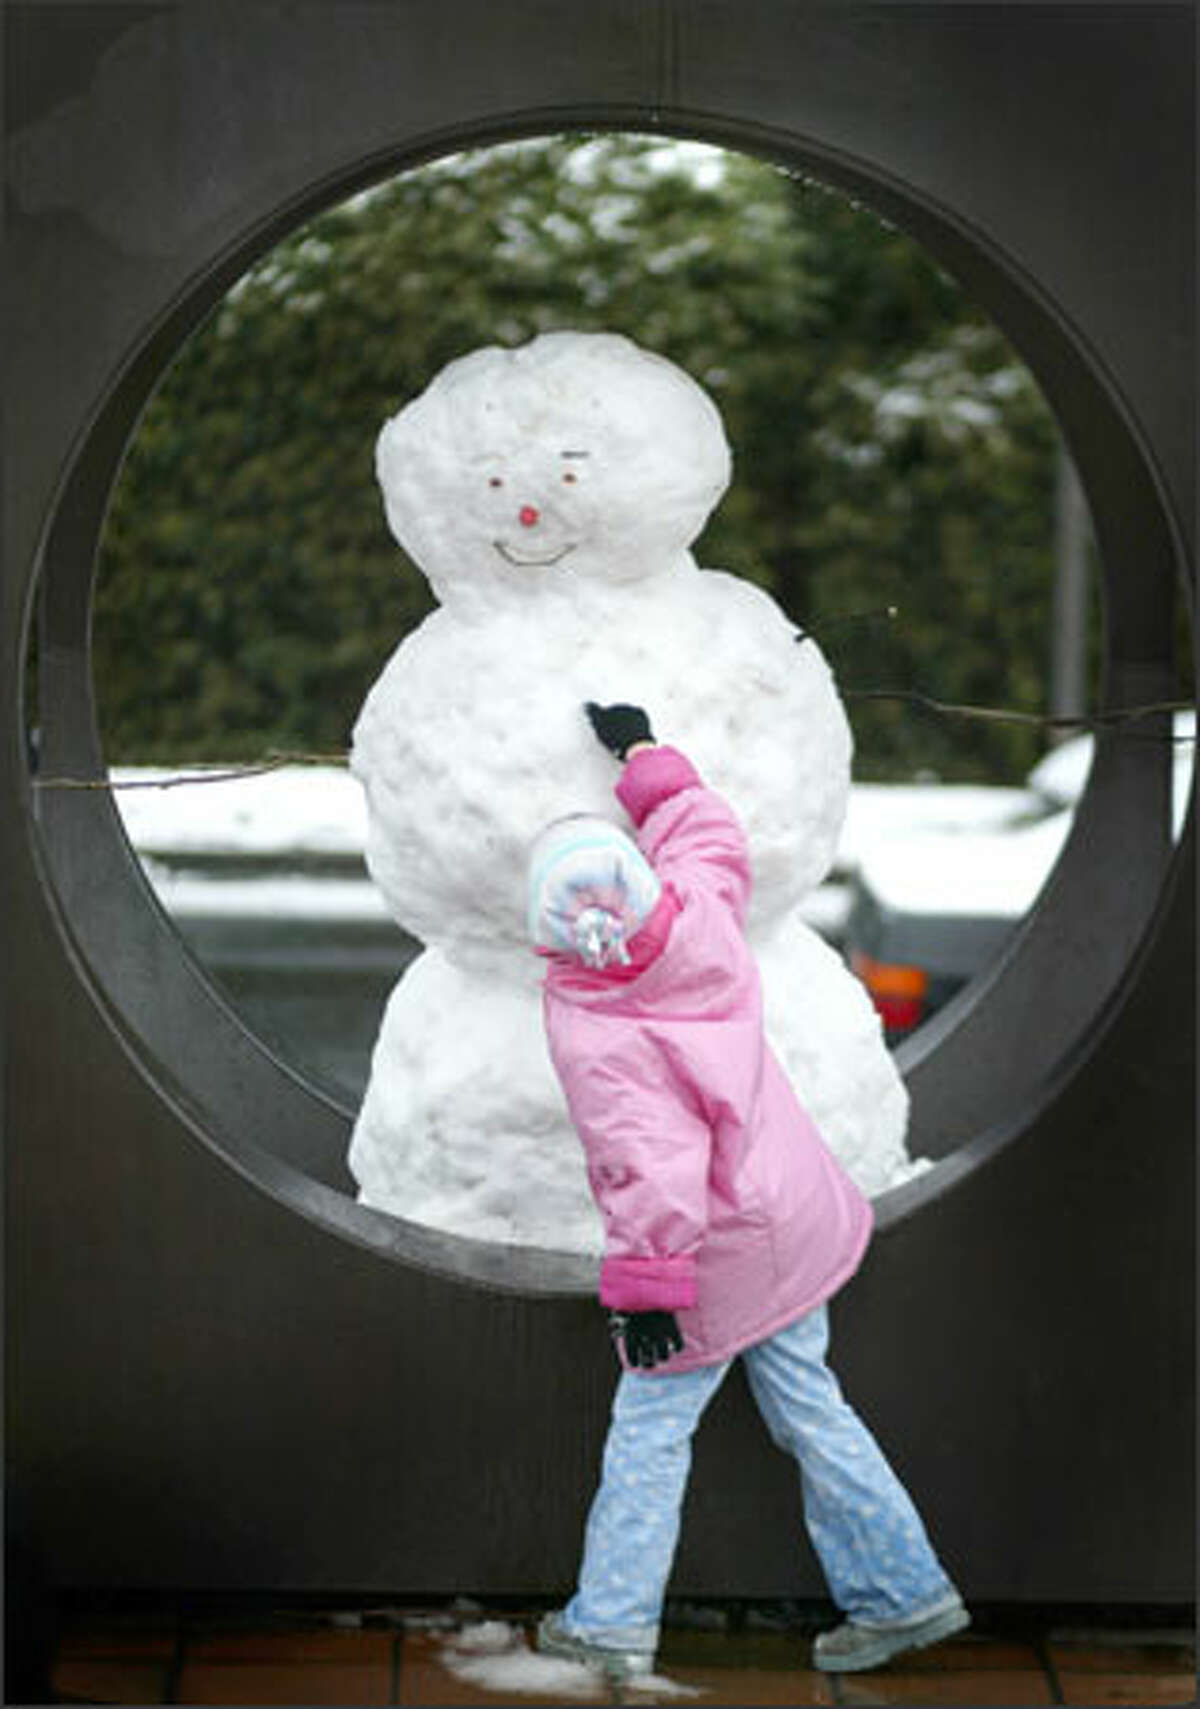 Sanuye Ford, 6, checks out the button of a snowman built inside the sculpture at Kerry Park on Queen Anne Hill. Seattle received a dusting of snow, with more of it falling north of downtown, early in the day. It brought out residents ready to play as well as city workers ready to plow and sand. The snow quickly melted.